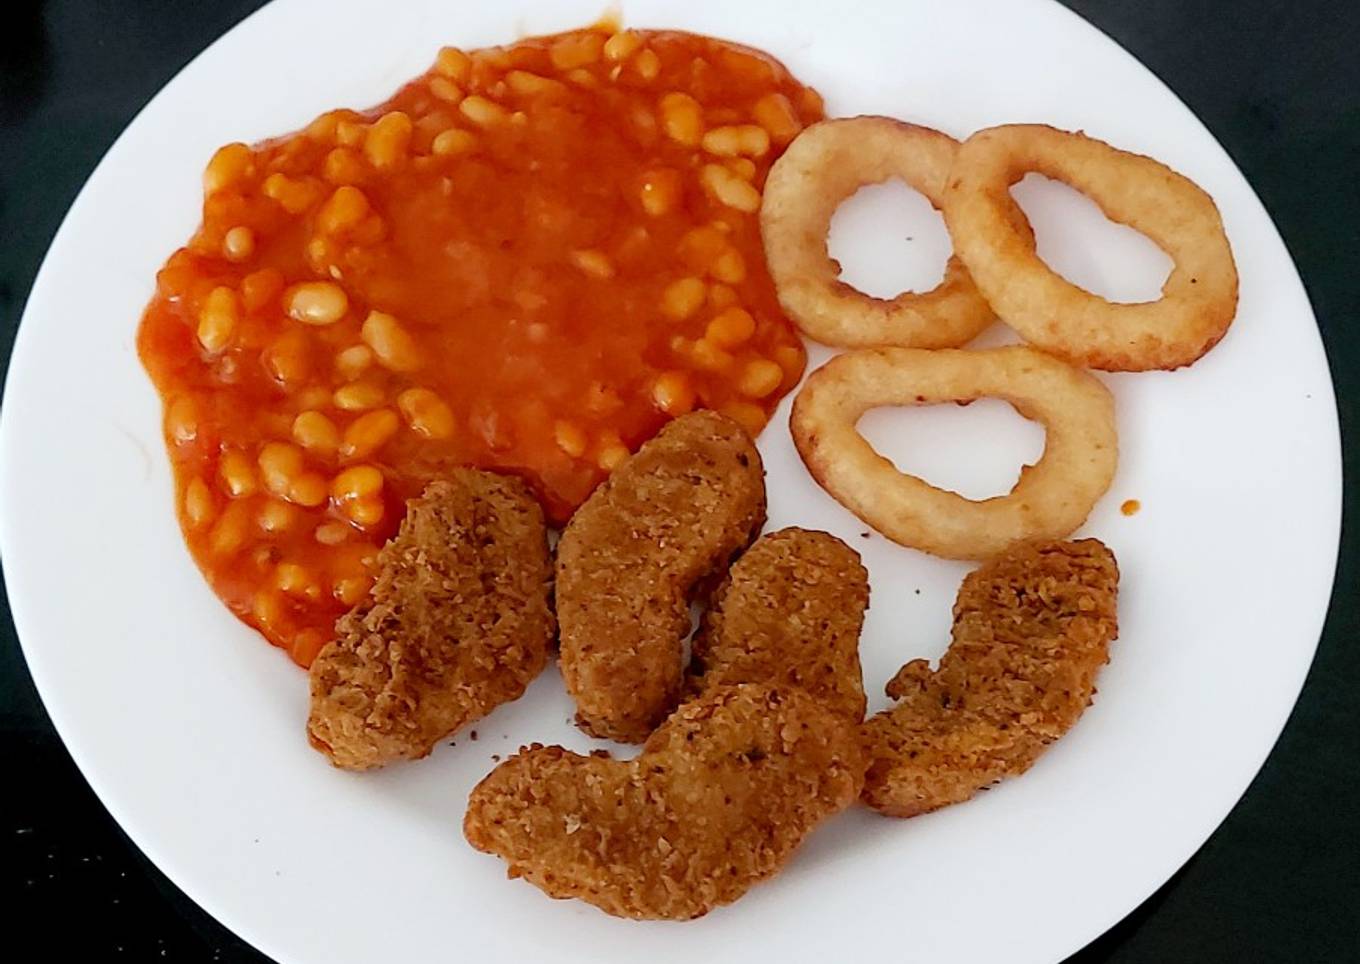 Southern fried Chicken Dippers, Onion rings + BBQ Beans 😋